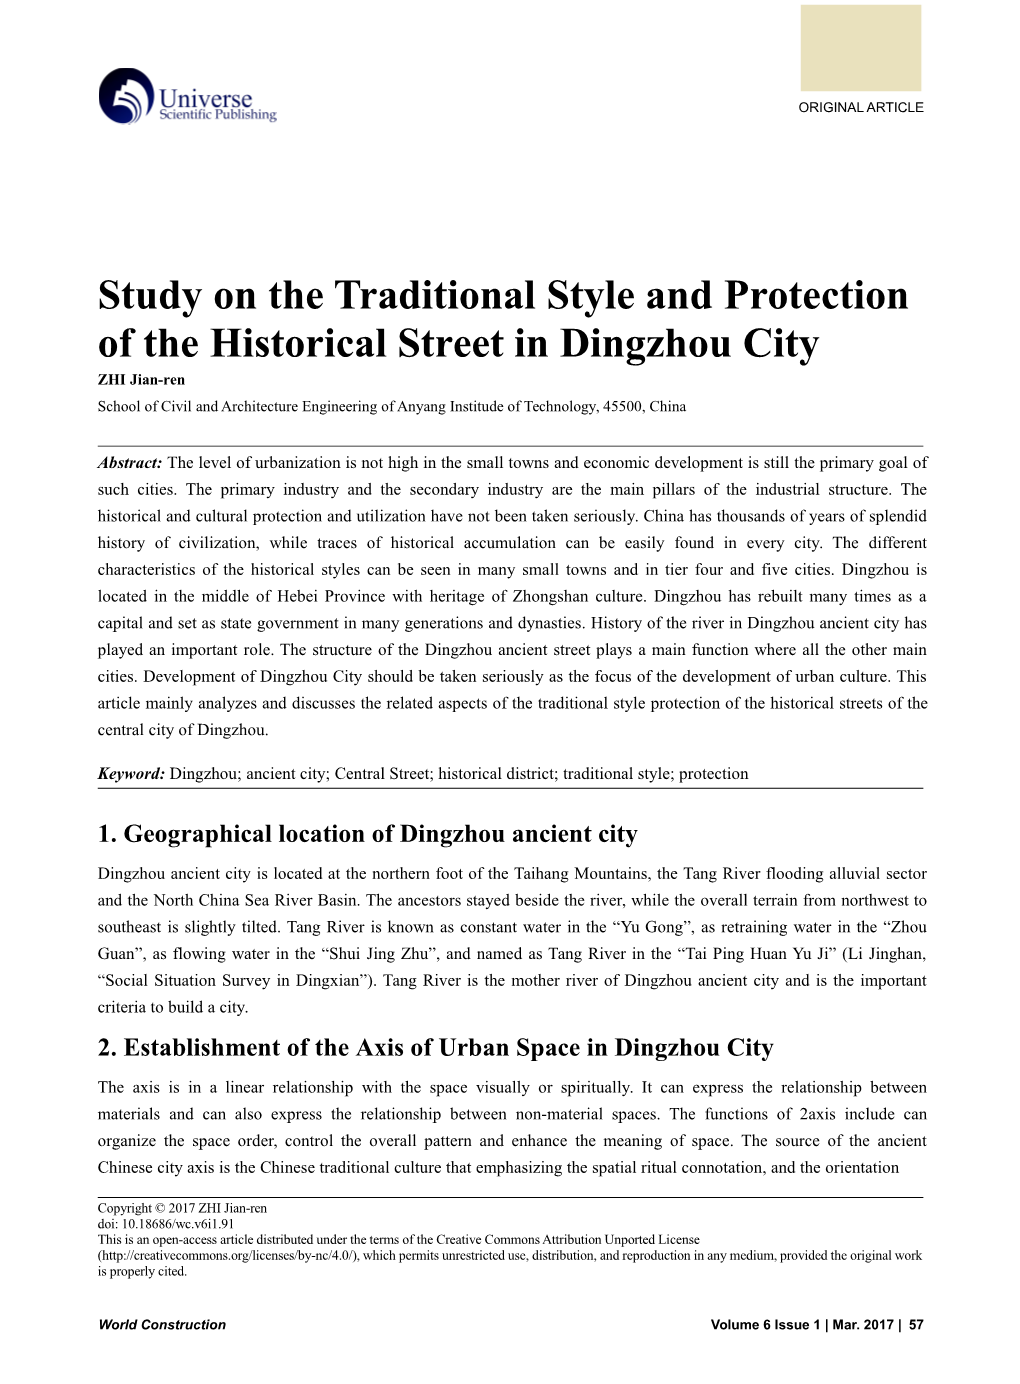 Study on the Traditional Style and Protection of the Historical Street In